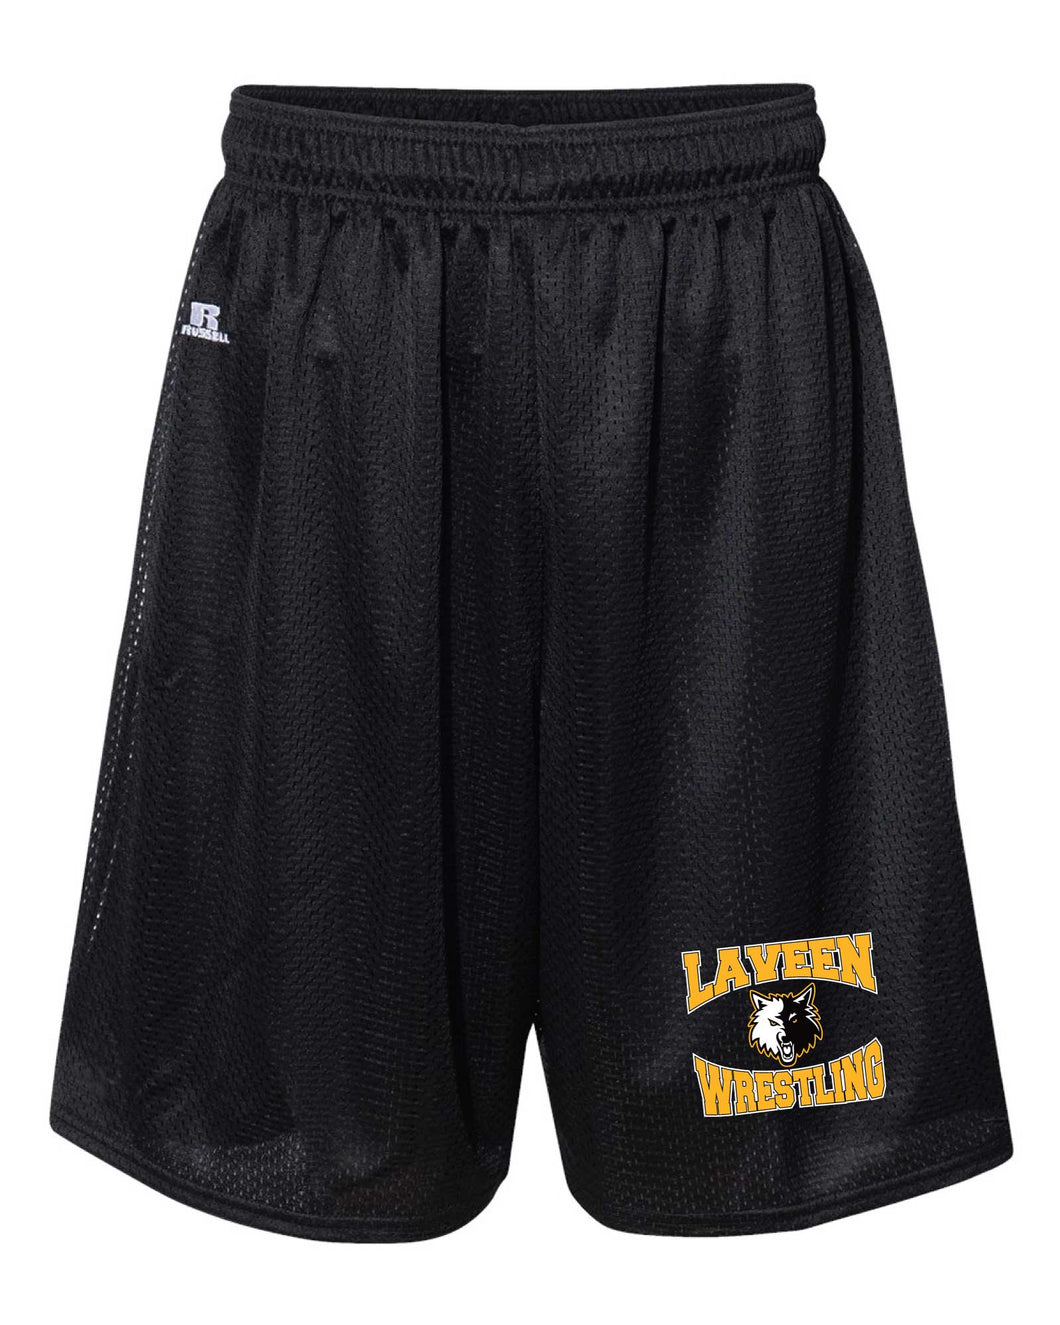 Laveen Wrestling Russell Athletic Tech Shorts - Black